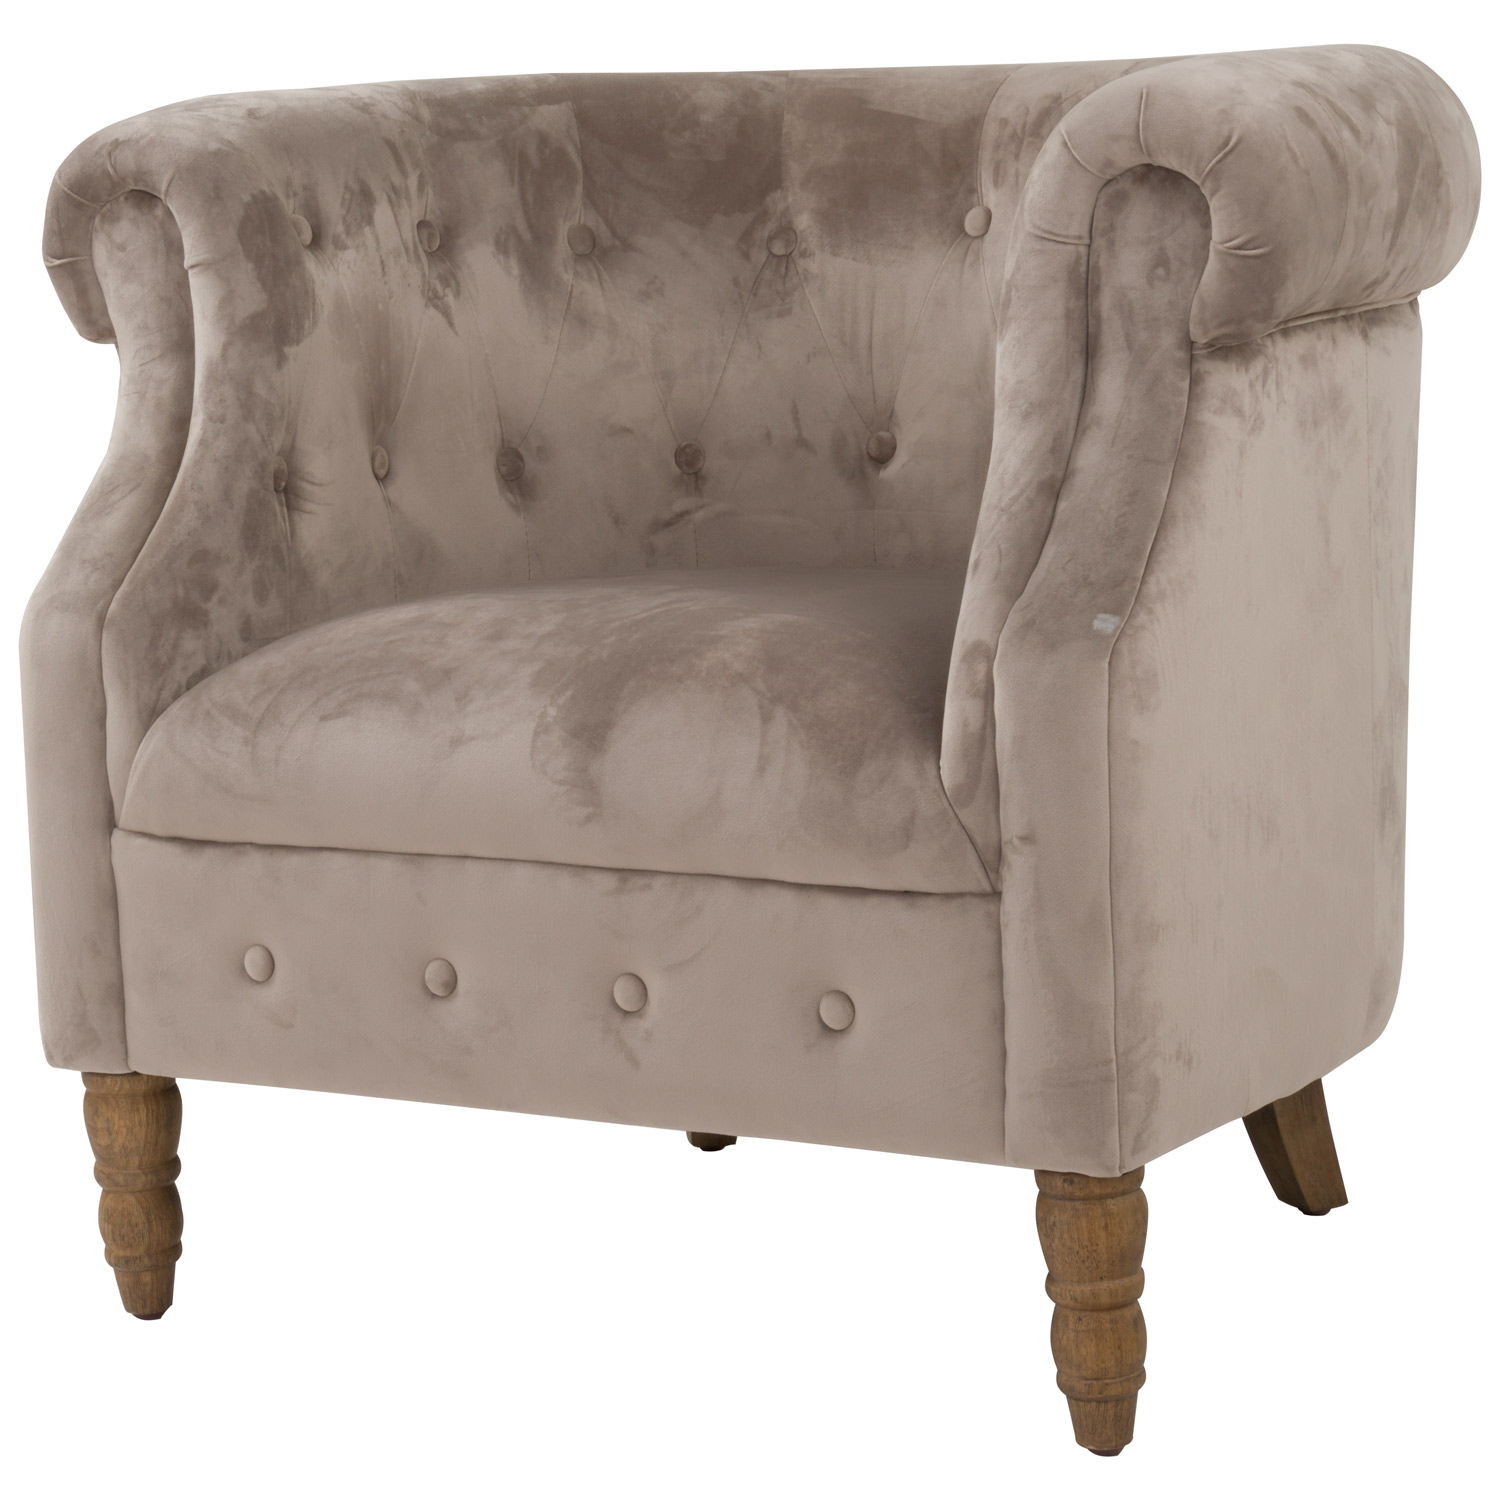 Chelsea Chesterfield Tub Chair - Image 1